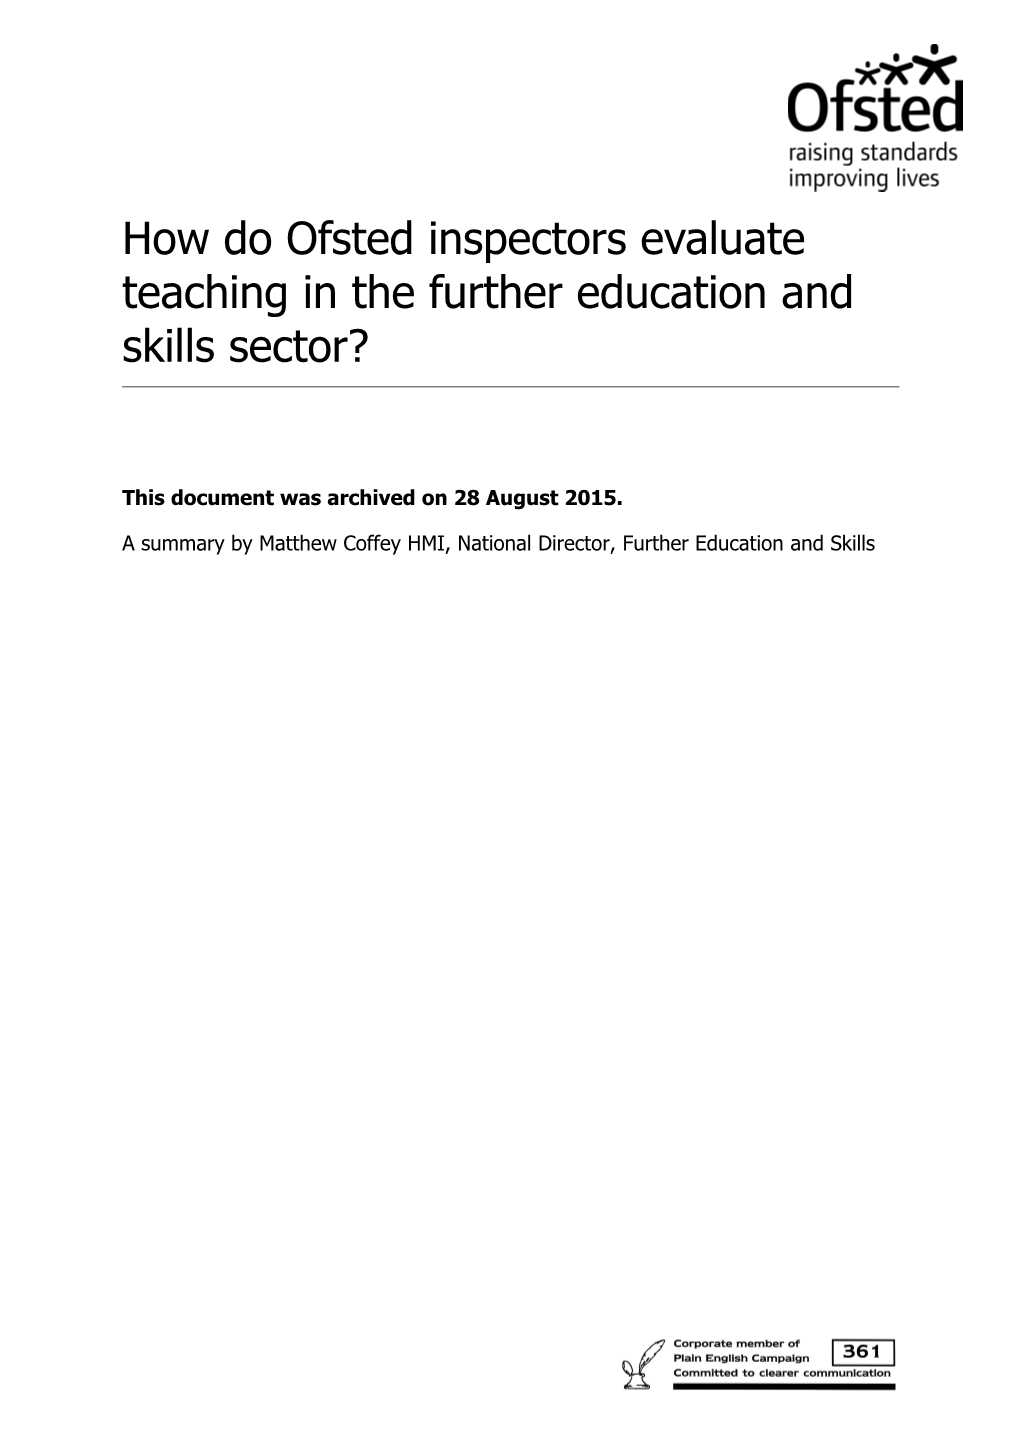 How Do Ofsted Inspectors Evaluate Teaching in the Further Education and Skills Sector?